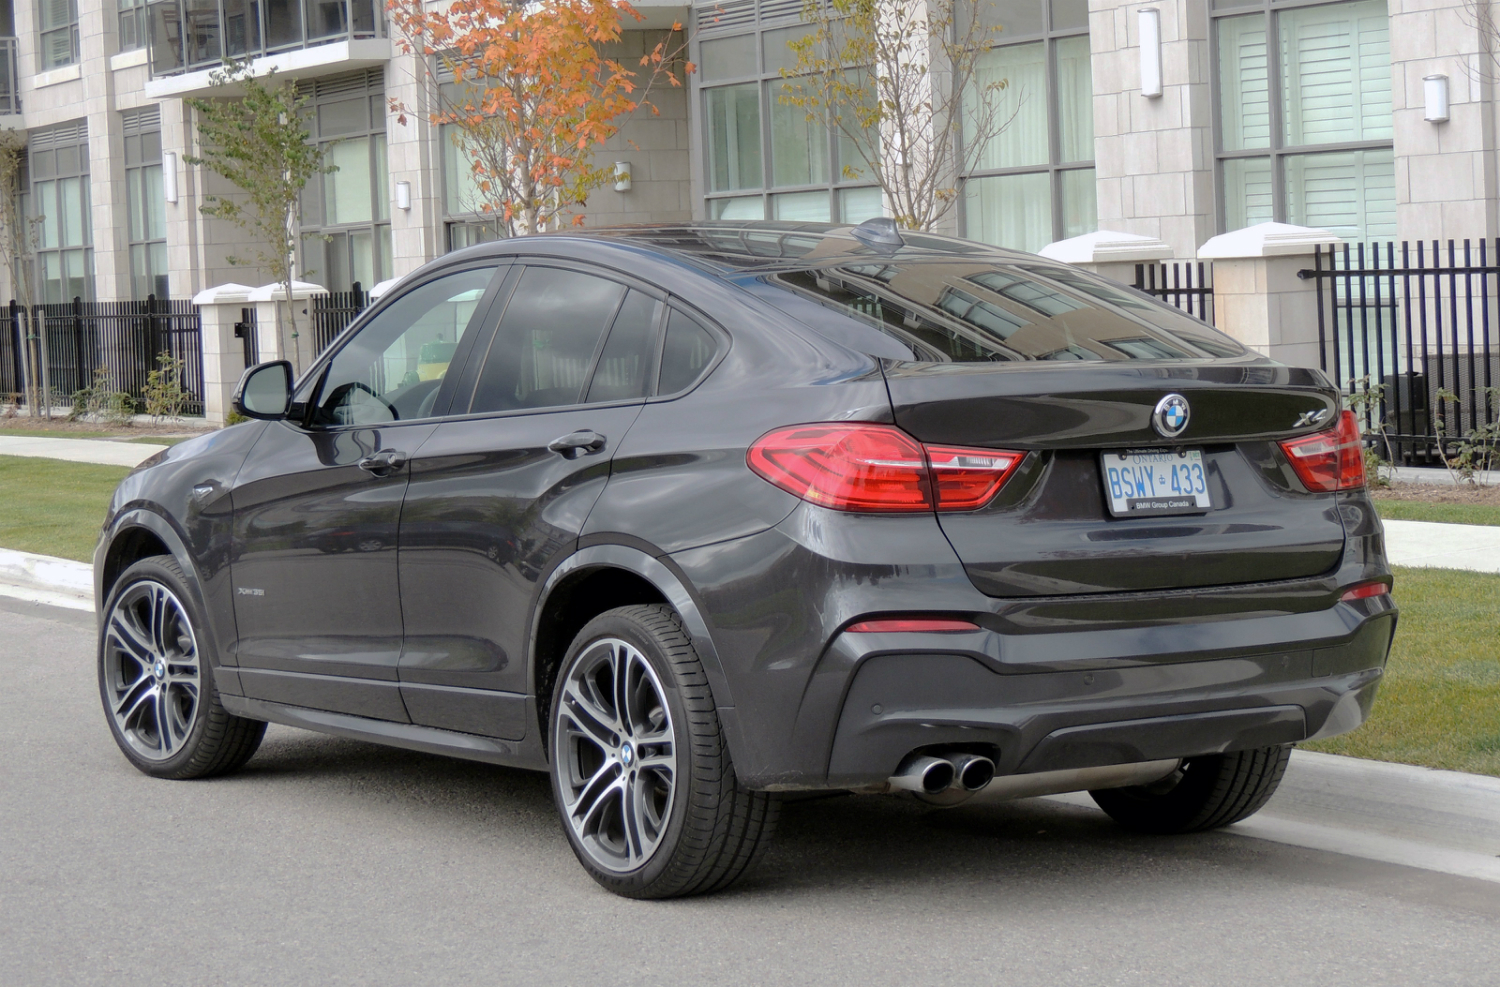 Images of BMW X4 | 1500x987